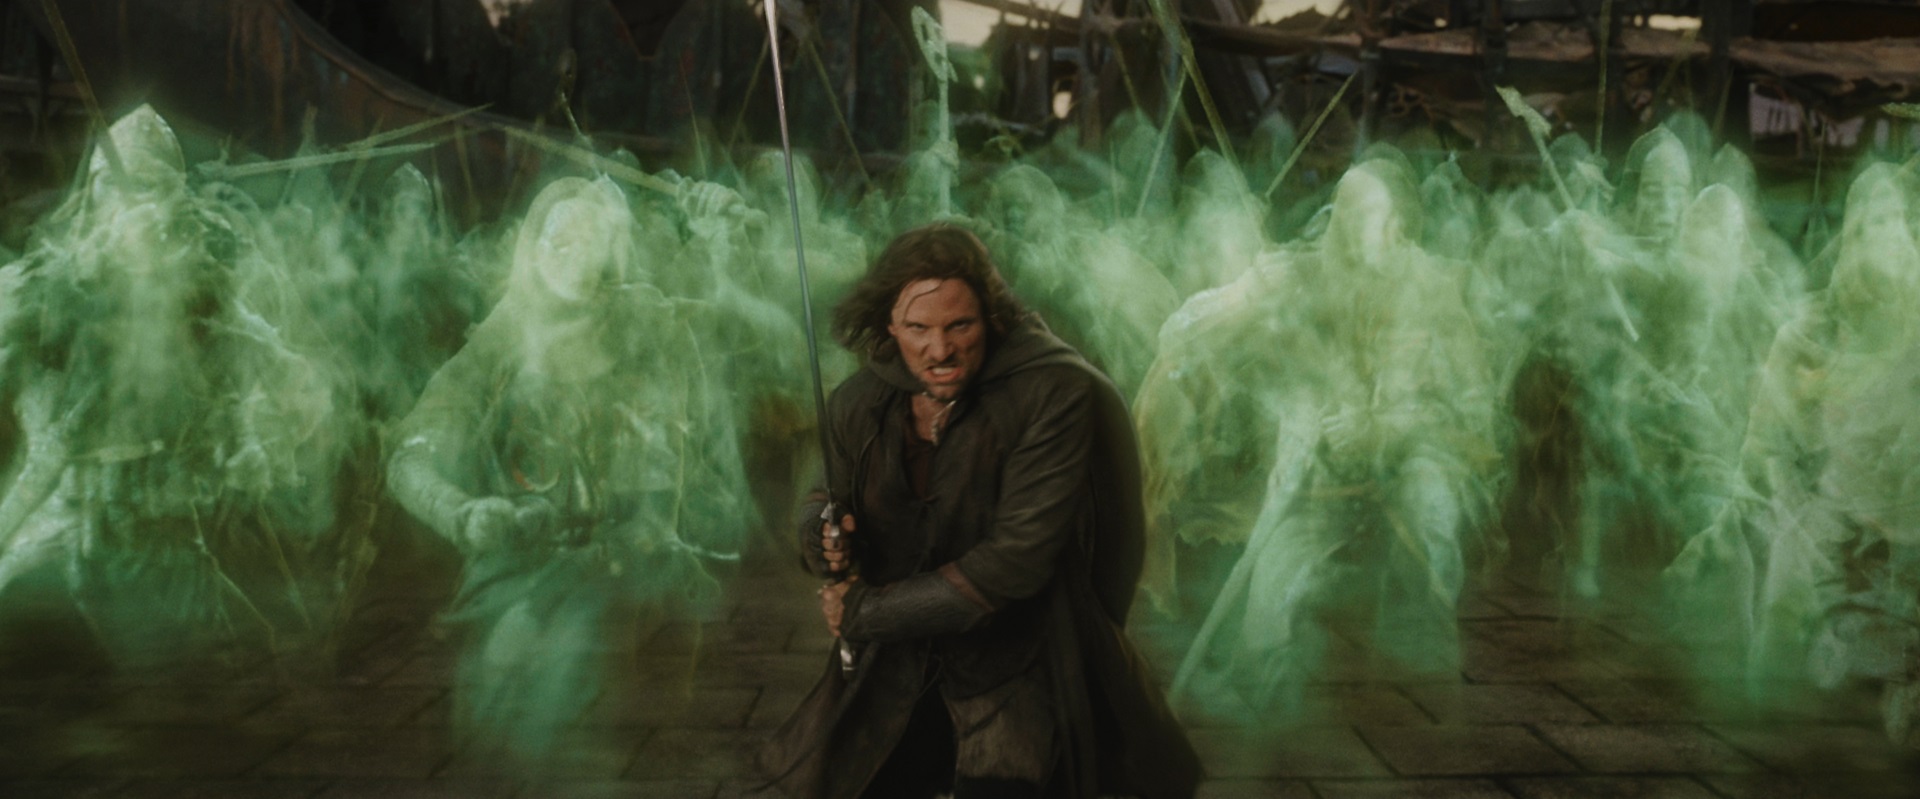 Aragorn_and_army_of_dead.jpg